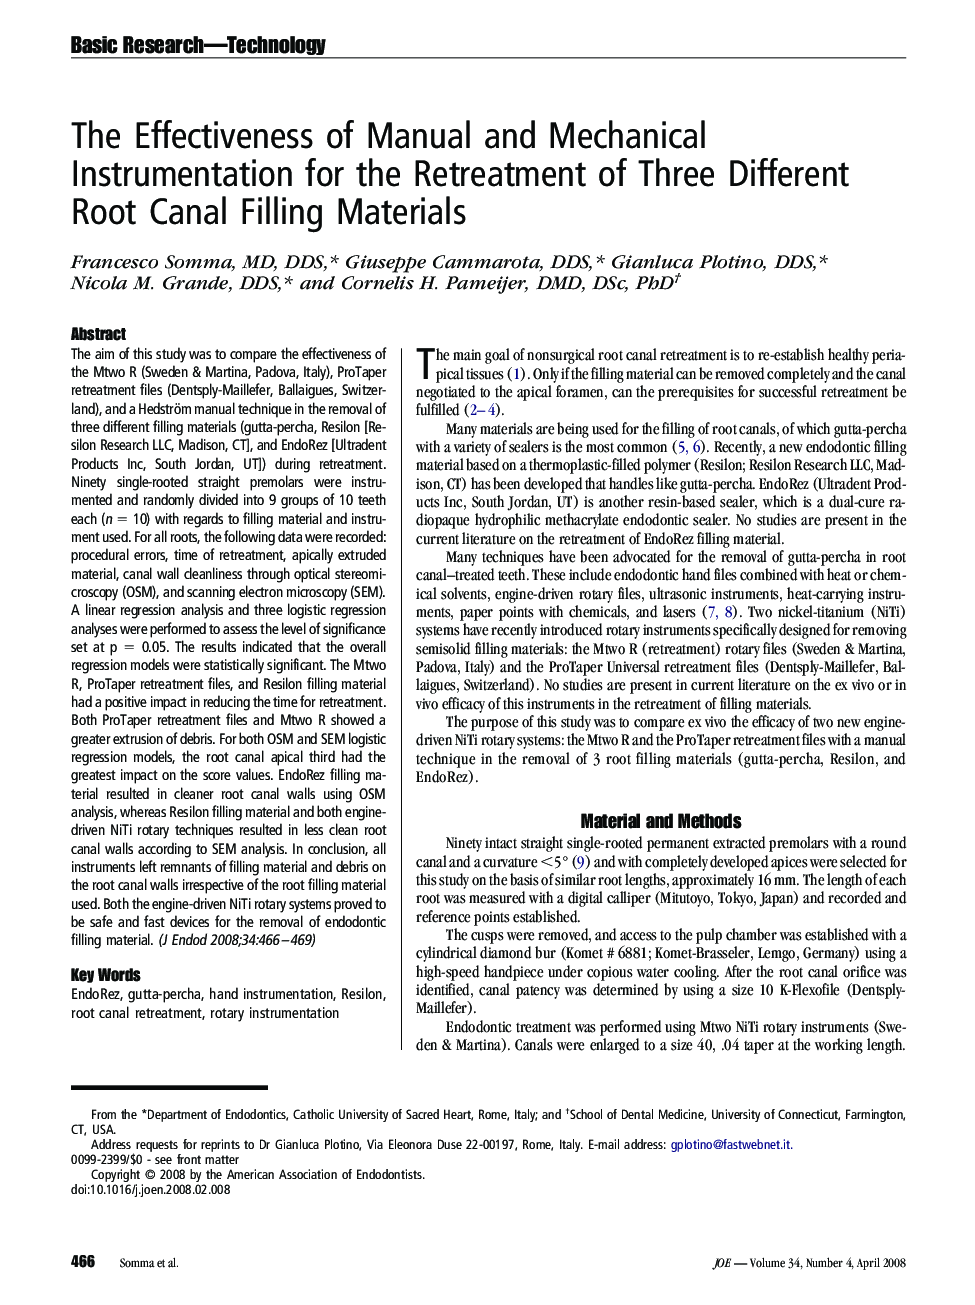 The Effectiveness of Manual and Mechanical Instrumentation for the Retreatment of Three Different Root Canal Filling Materials